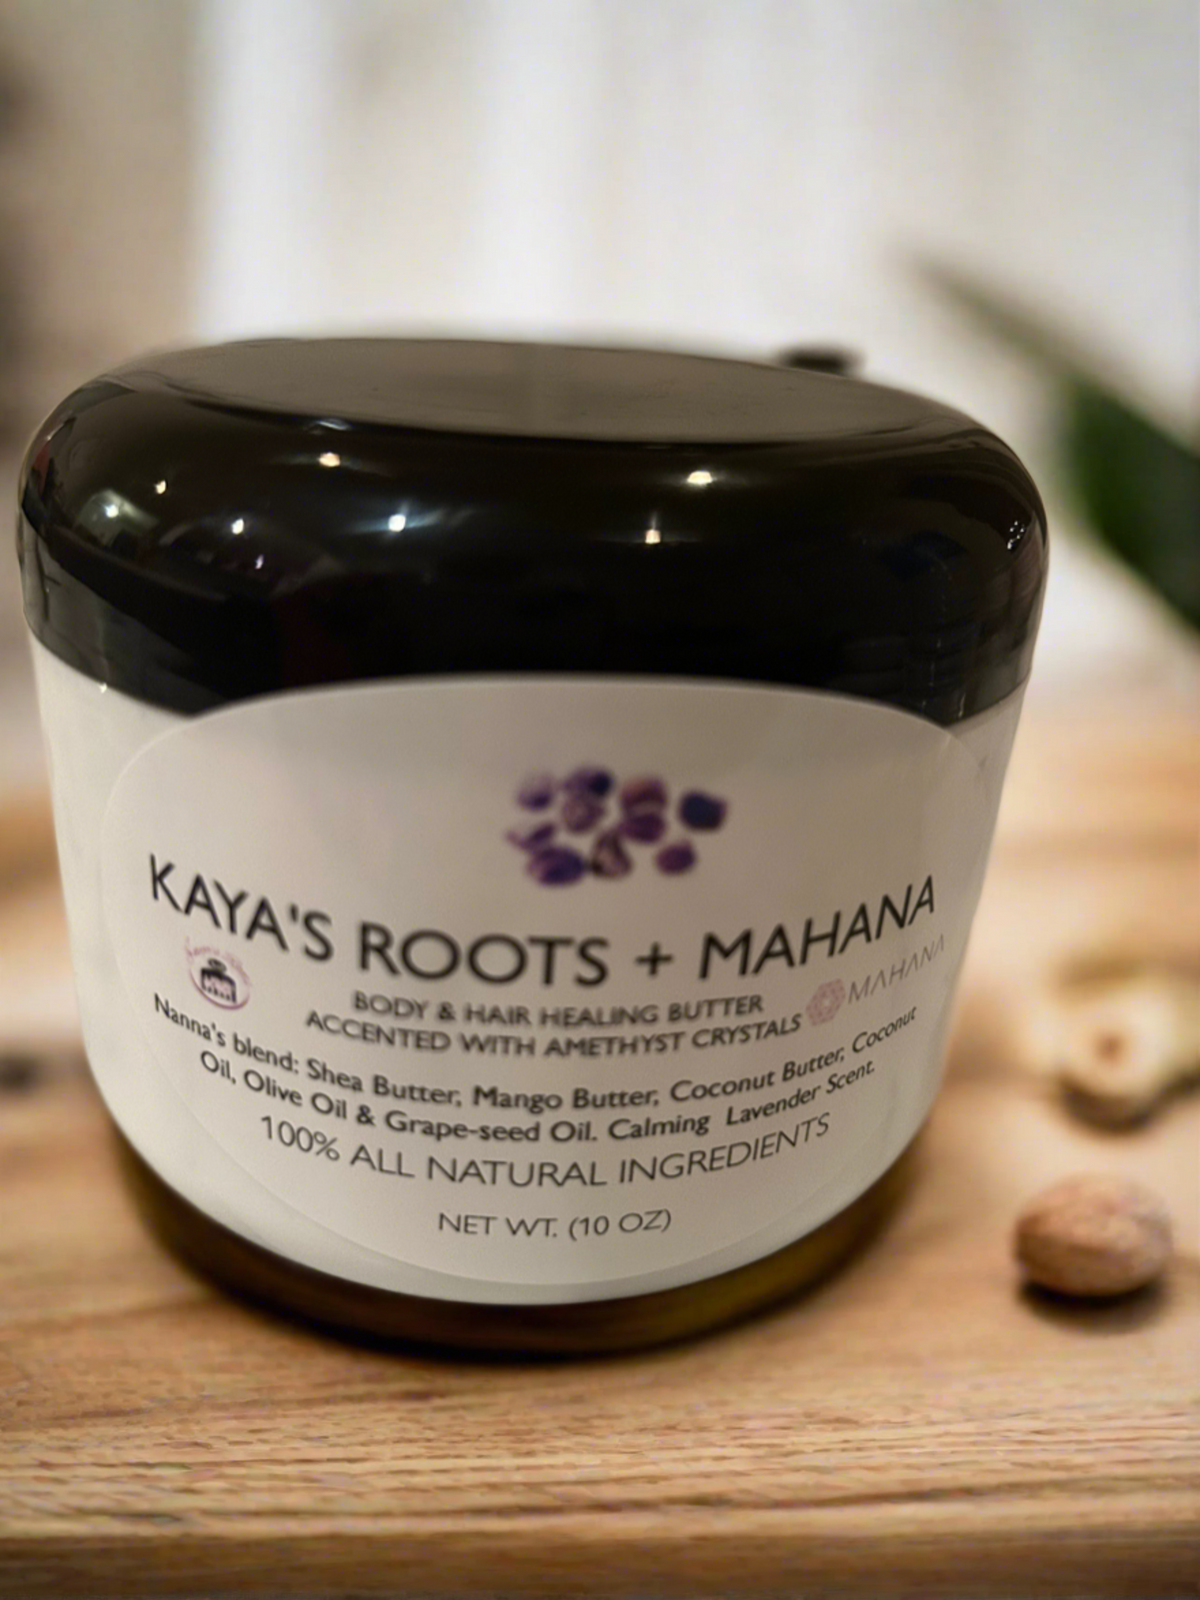 Healing Butter: A collaboration with Kaya's Roots